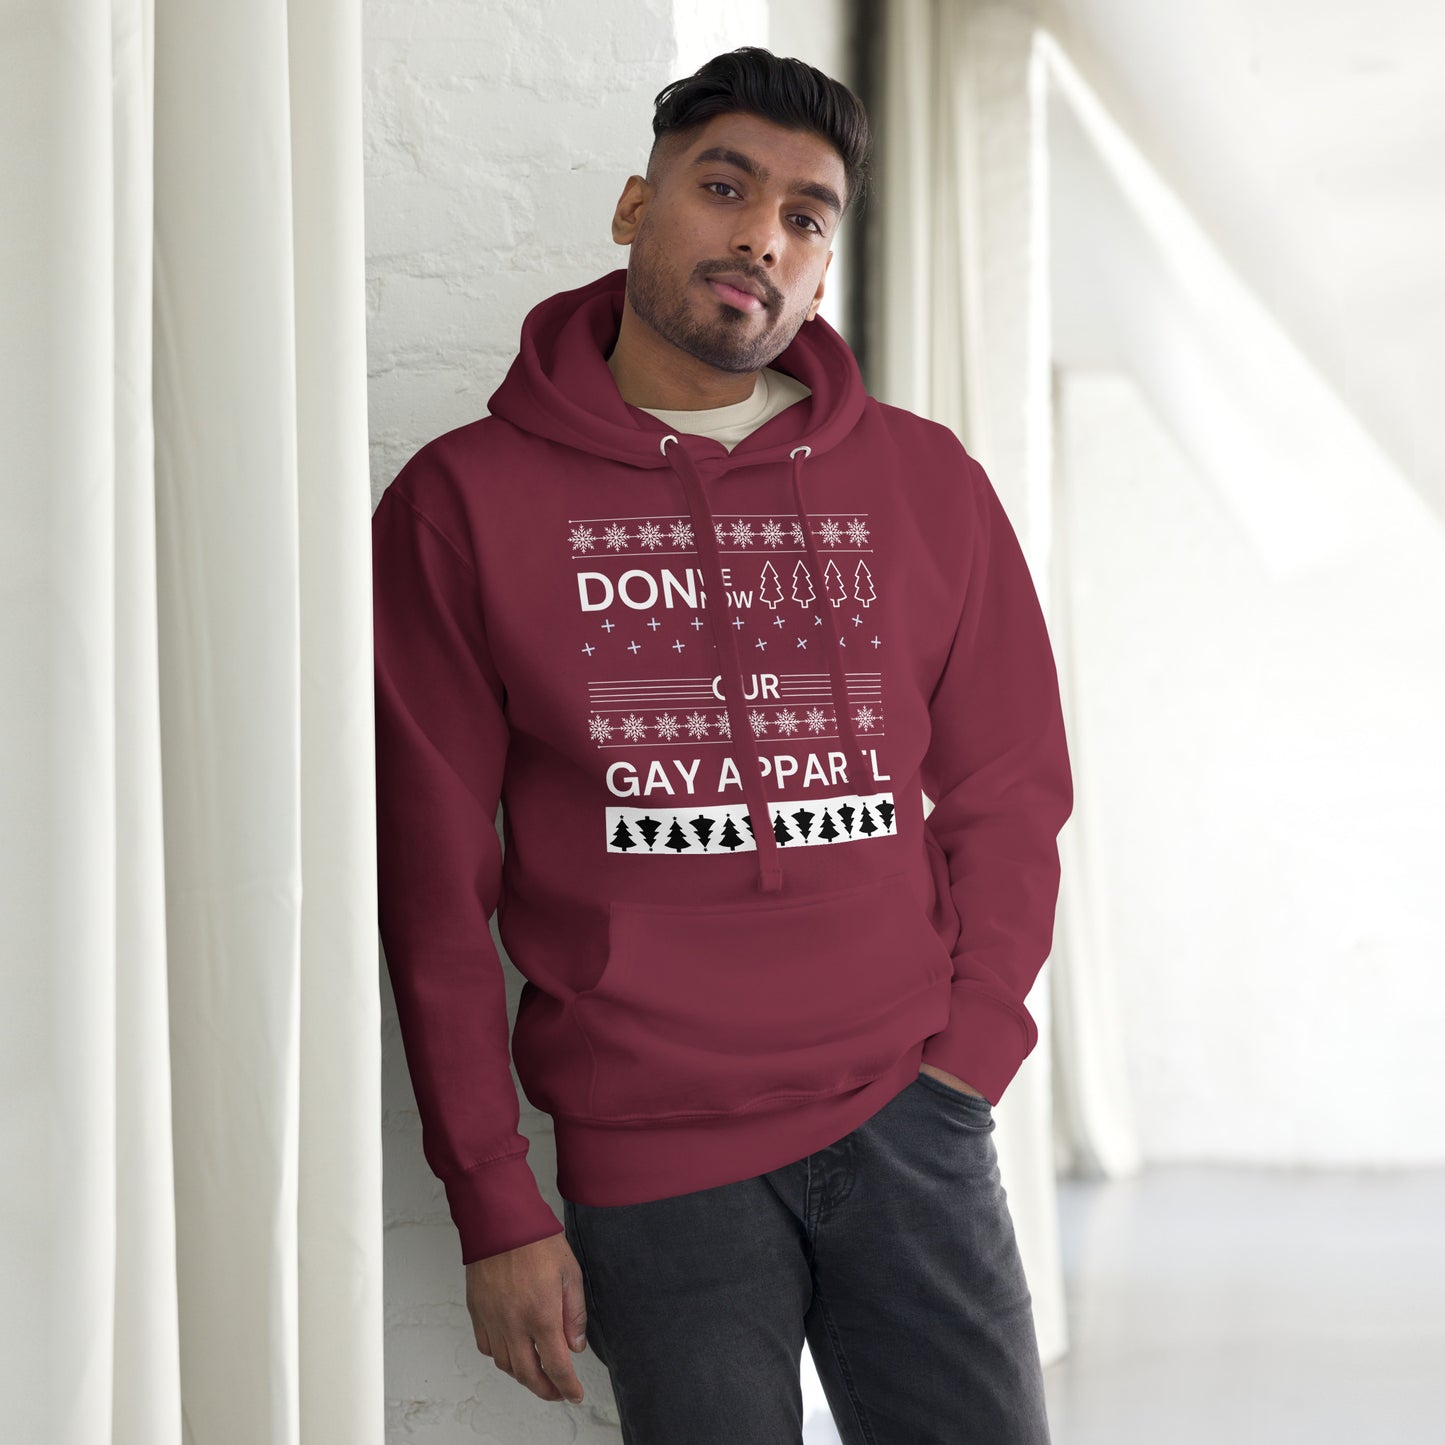 Don We Now Our Gay Apparel Hoodie